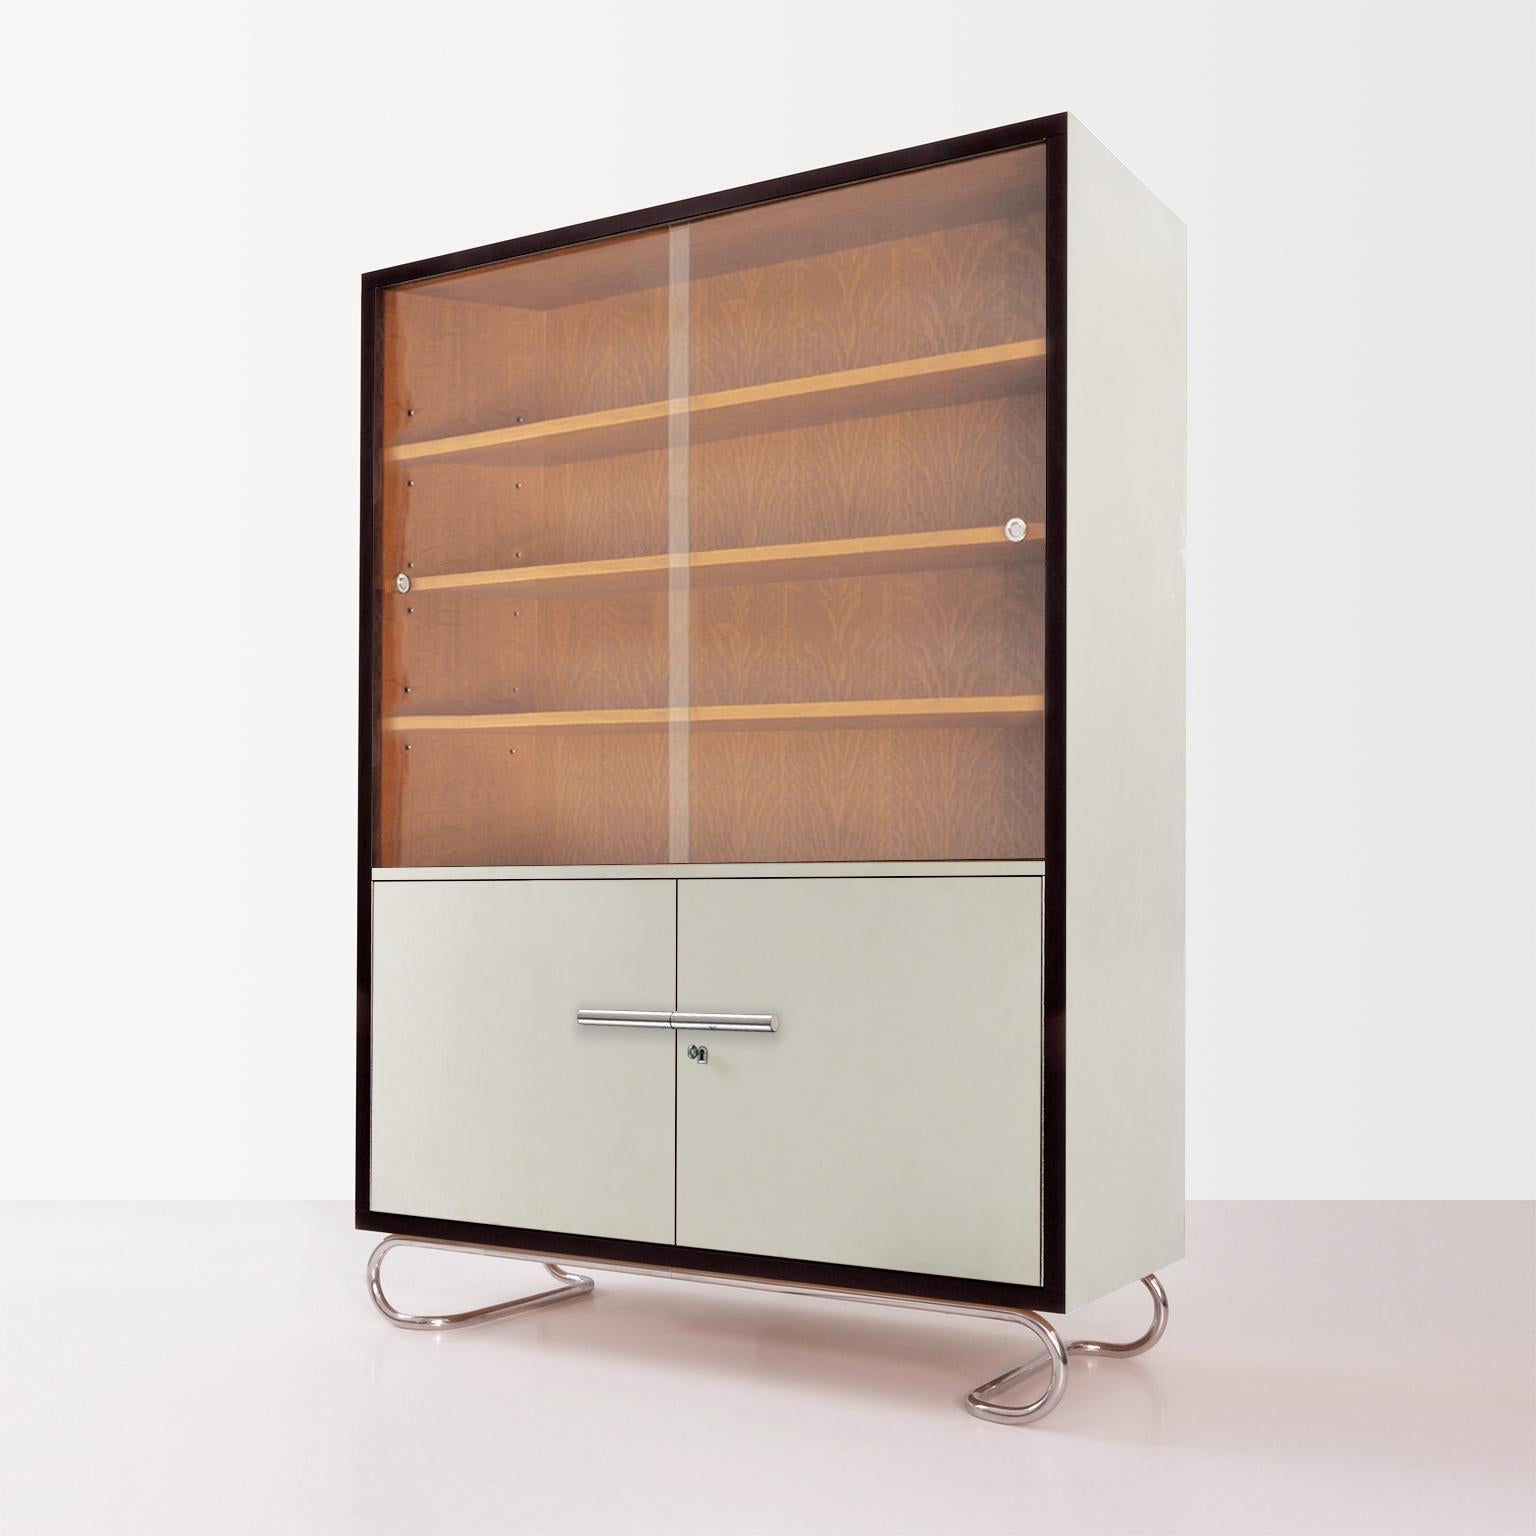 Bespoke modernism showcase cabinet designed and manufactured by GMD Berlin. Wood lacquering in various colors and finish. Available on request in different amounts.